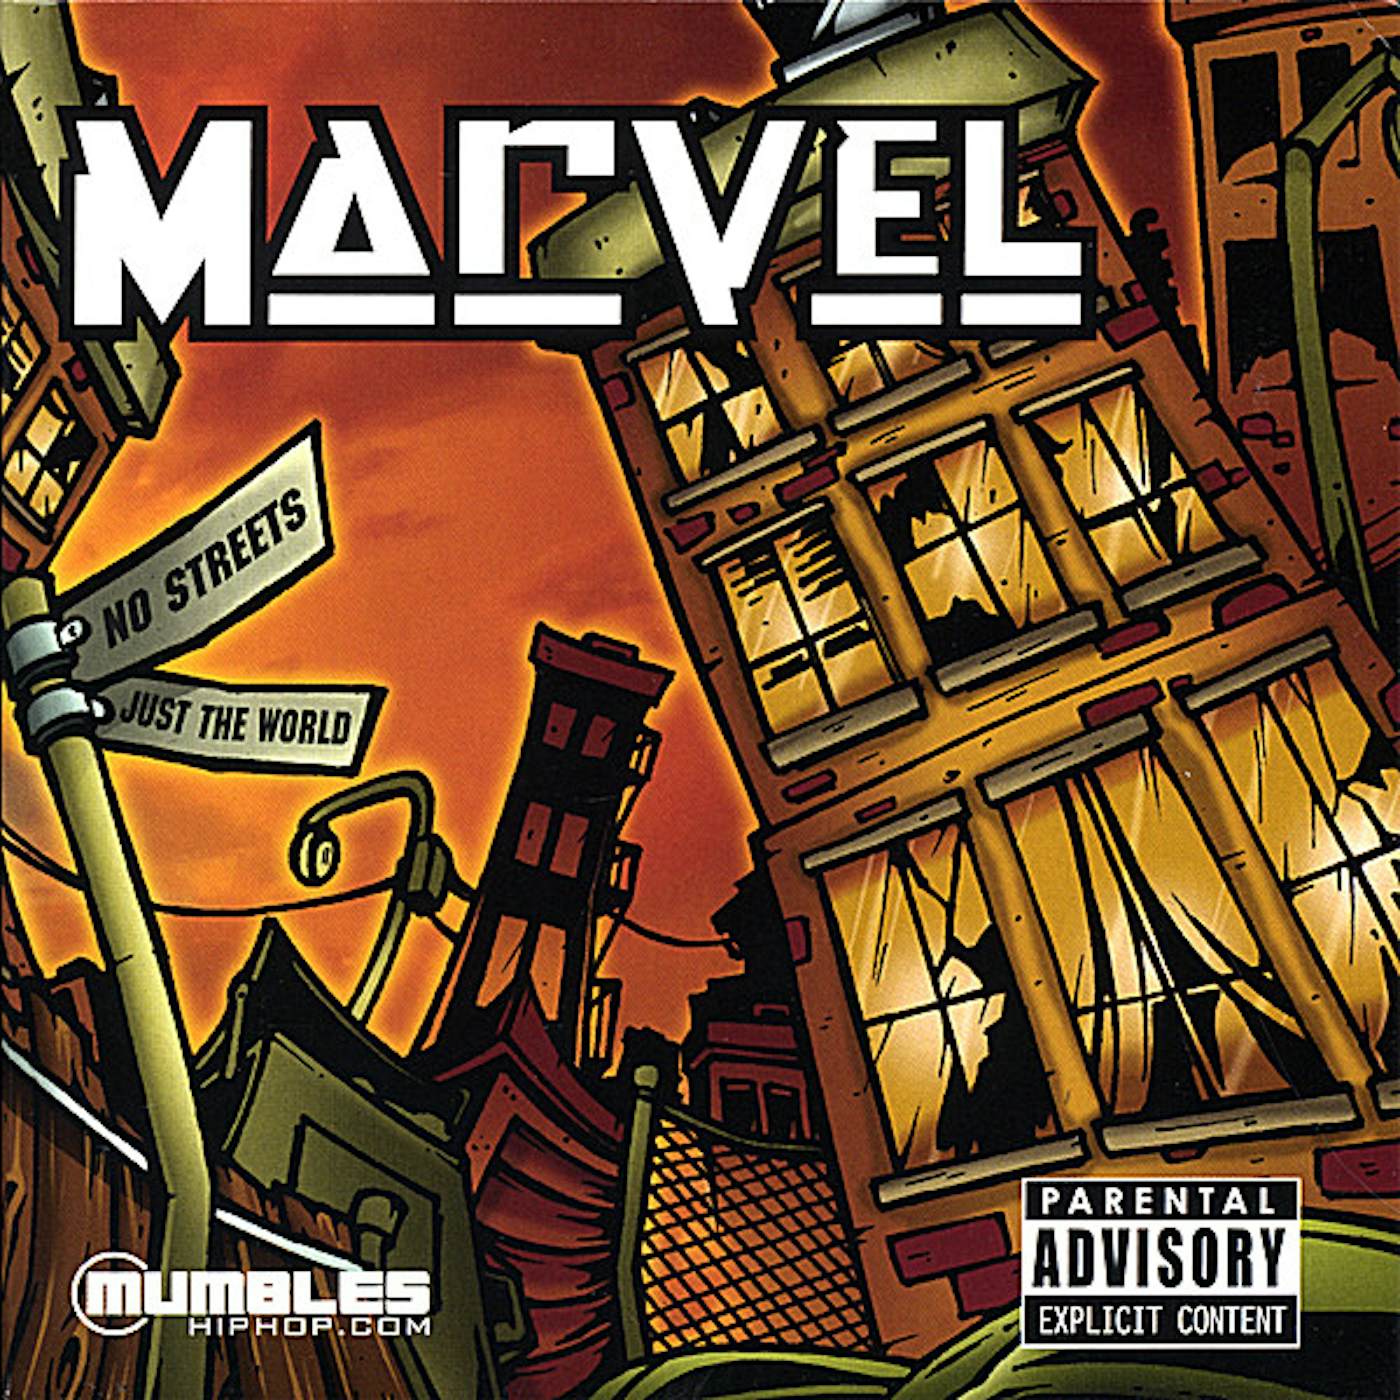 Marvel NO STREETS (JUST THE WORLD) CD